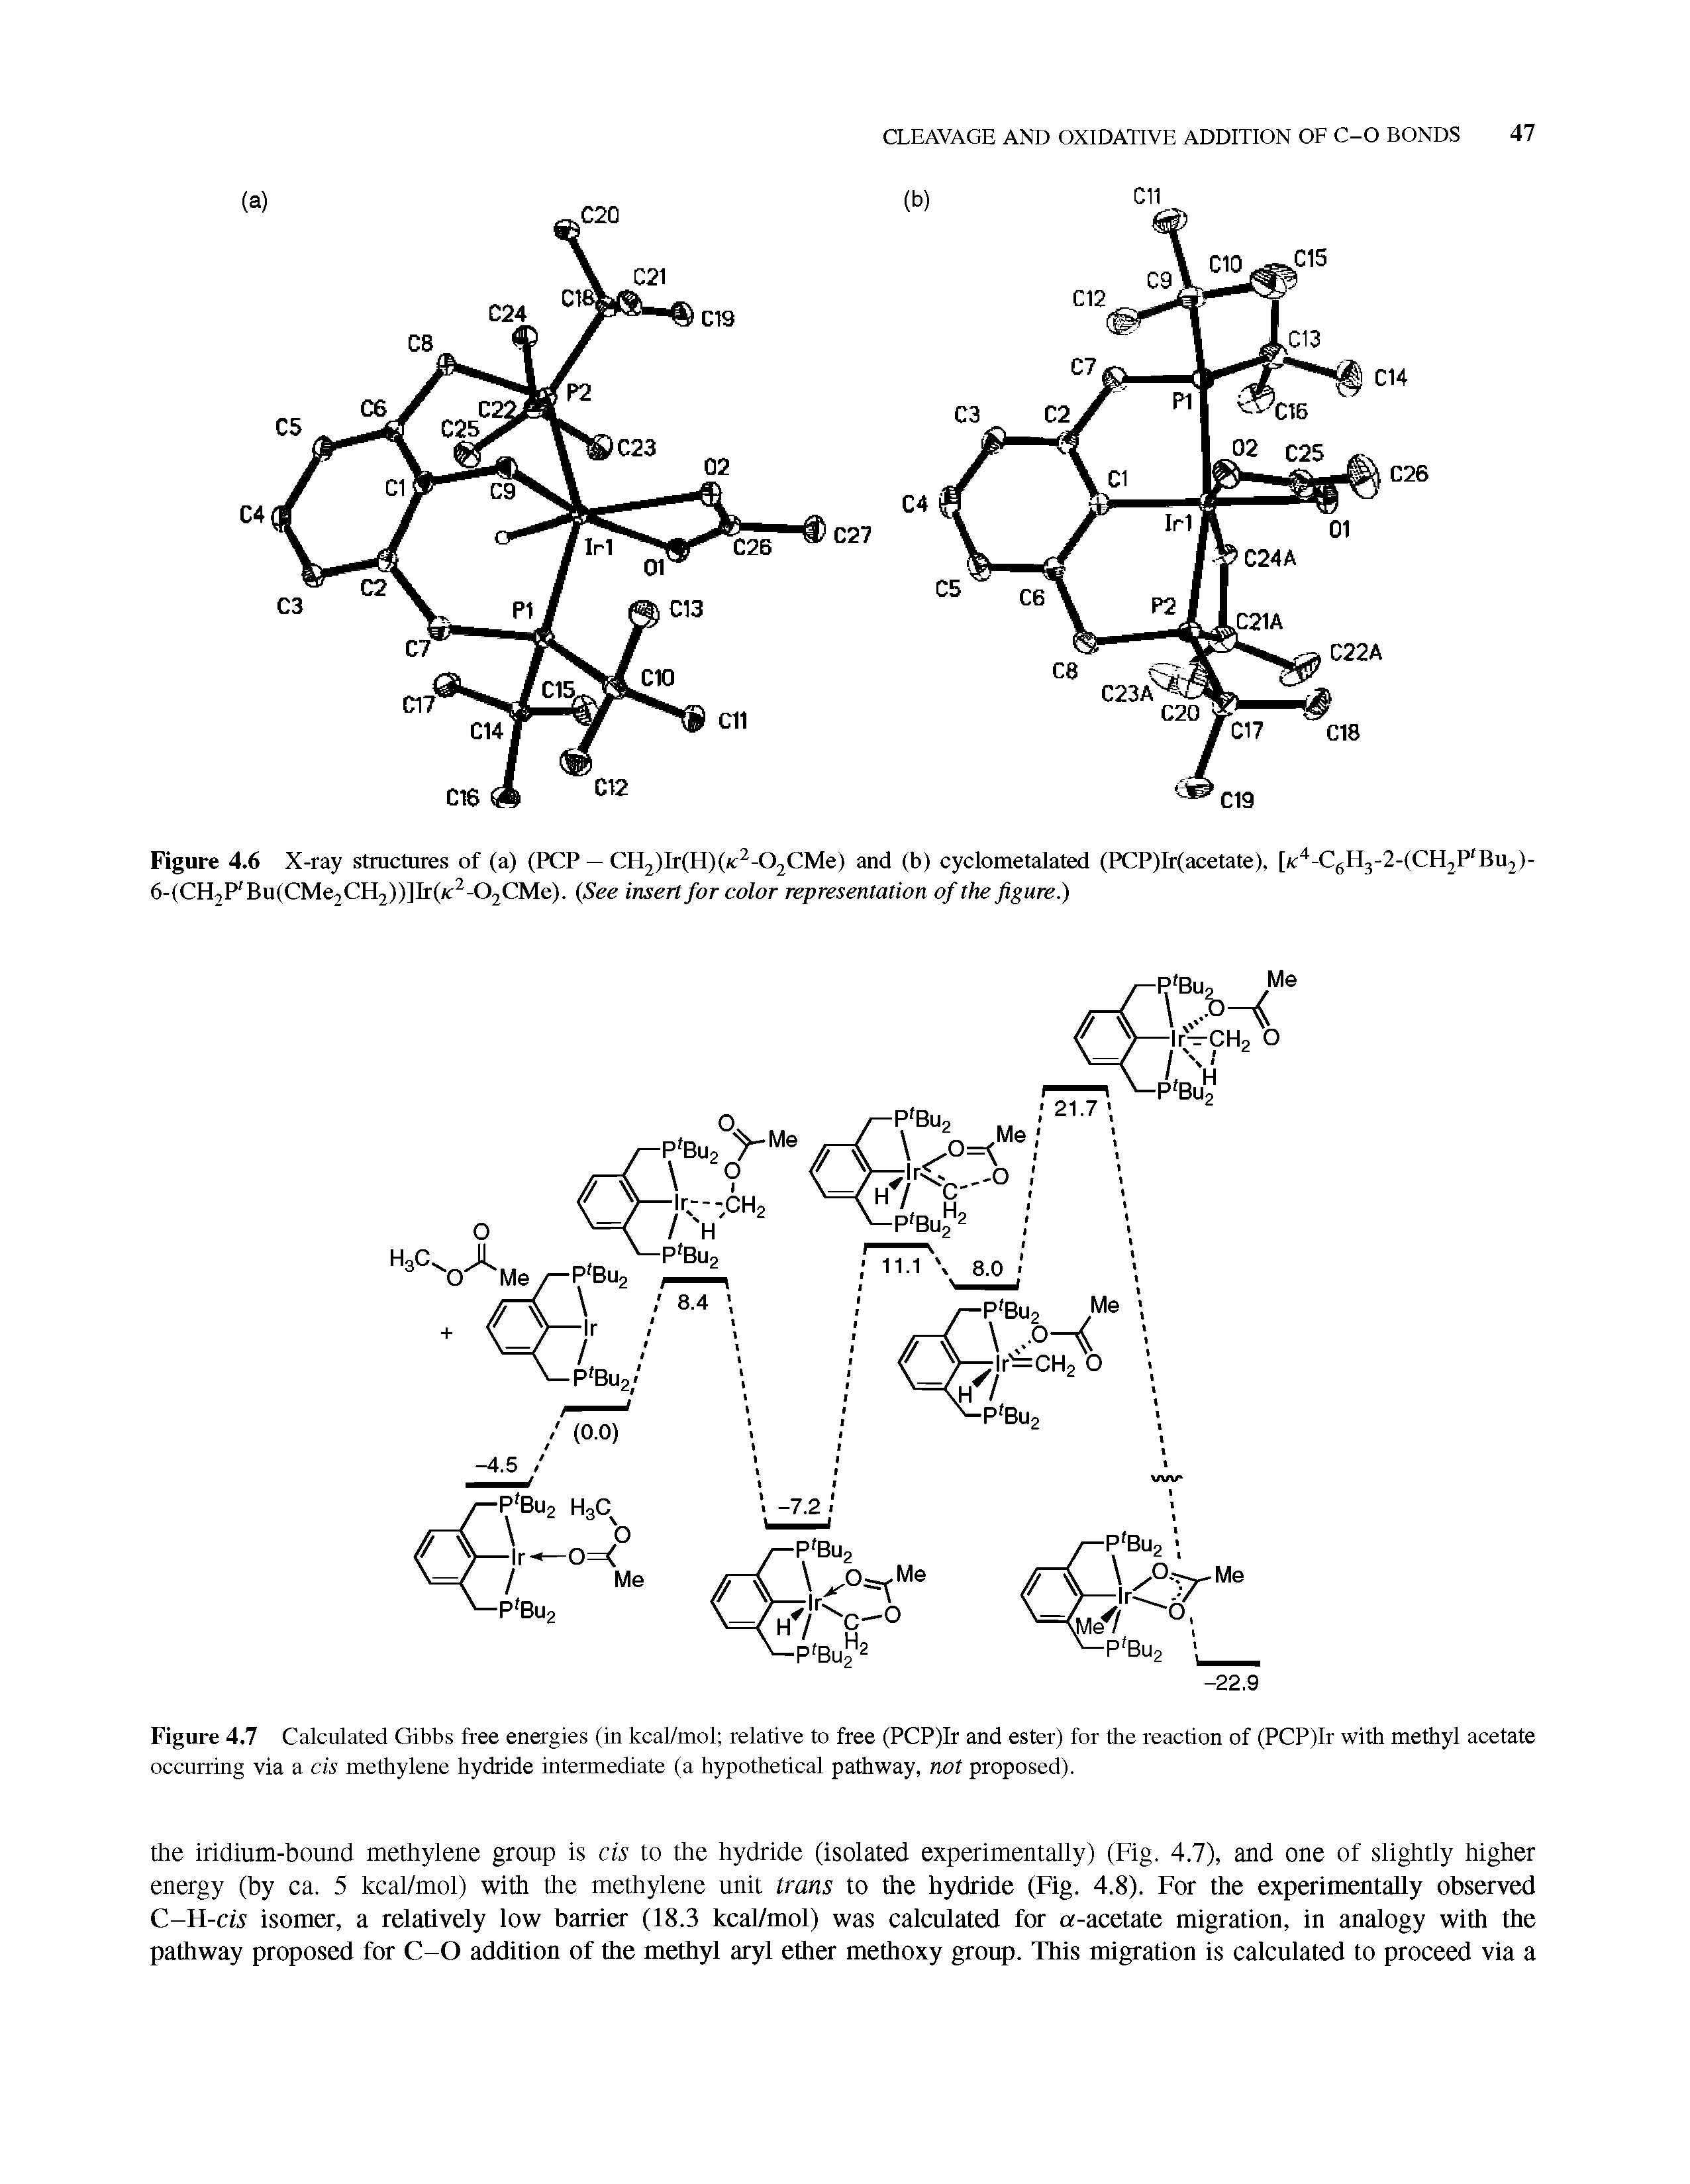 Figure 4.7 Calculated Gibbs free energies (in kcal/mol relative to free (PCP)Ir and ester) for the reaction of (PCP)lr with methyl acetate occurring via a cis methylene hydride intermediate (a hypothetical pathway, not proposed).